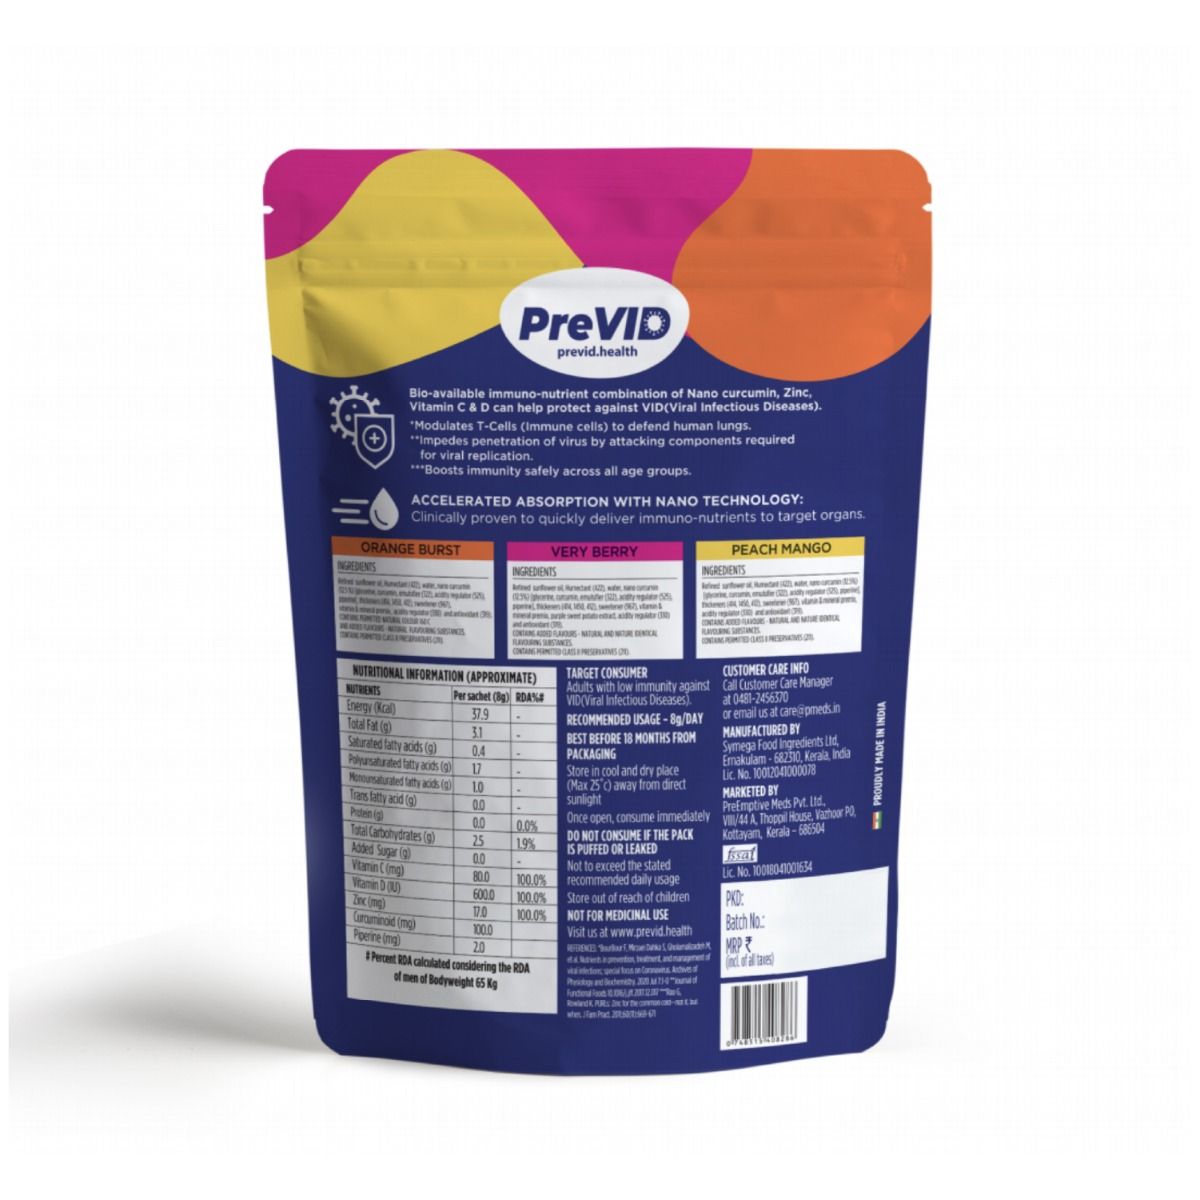 PreVID Powered-Up Immunity Pack, 240 gm (30 sachets x 8 gm), Pack of 1 